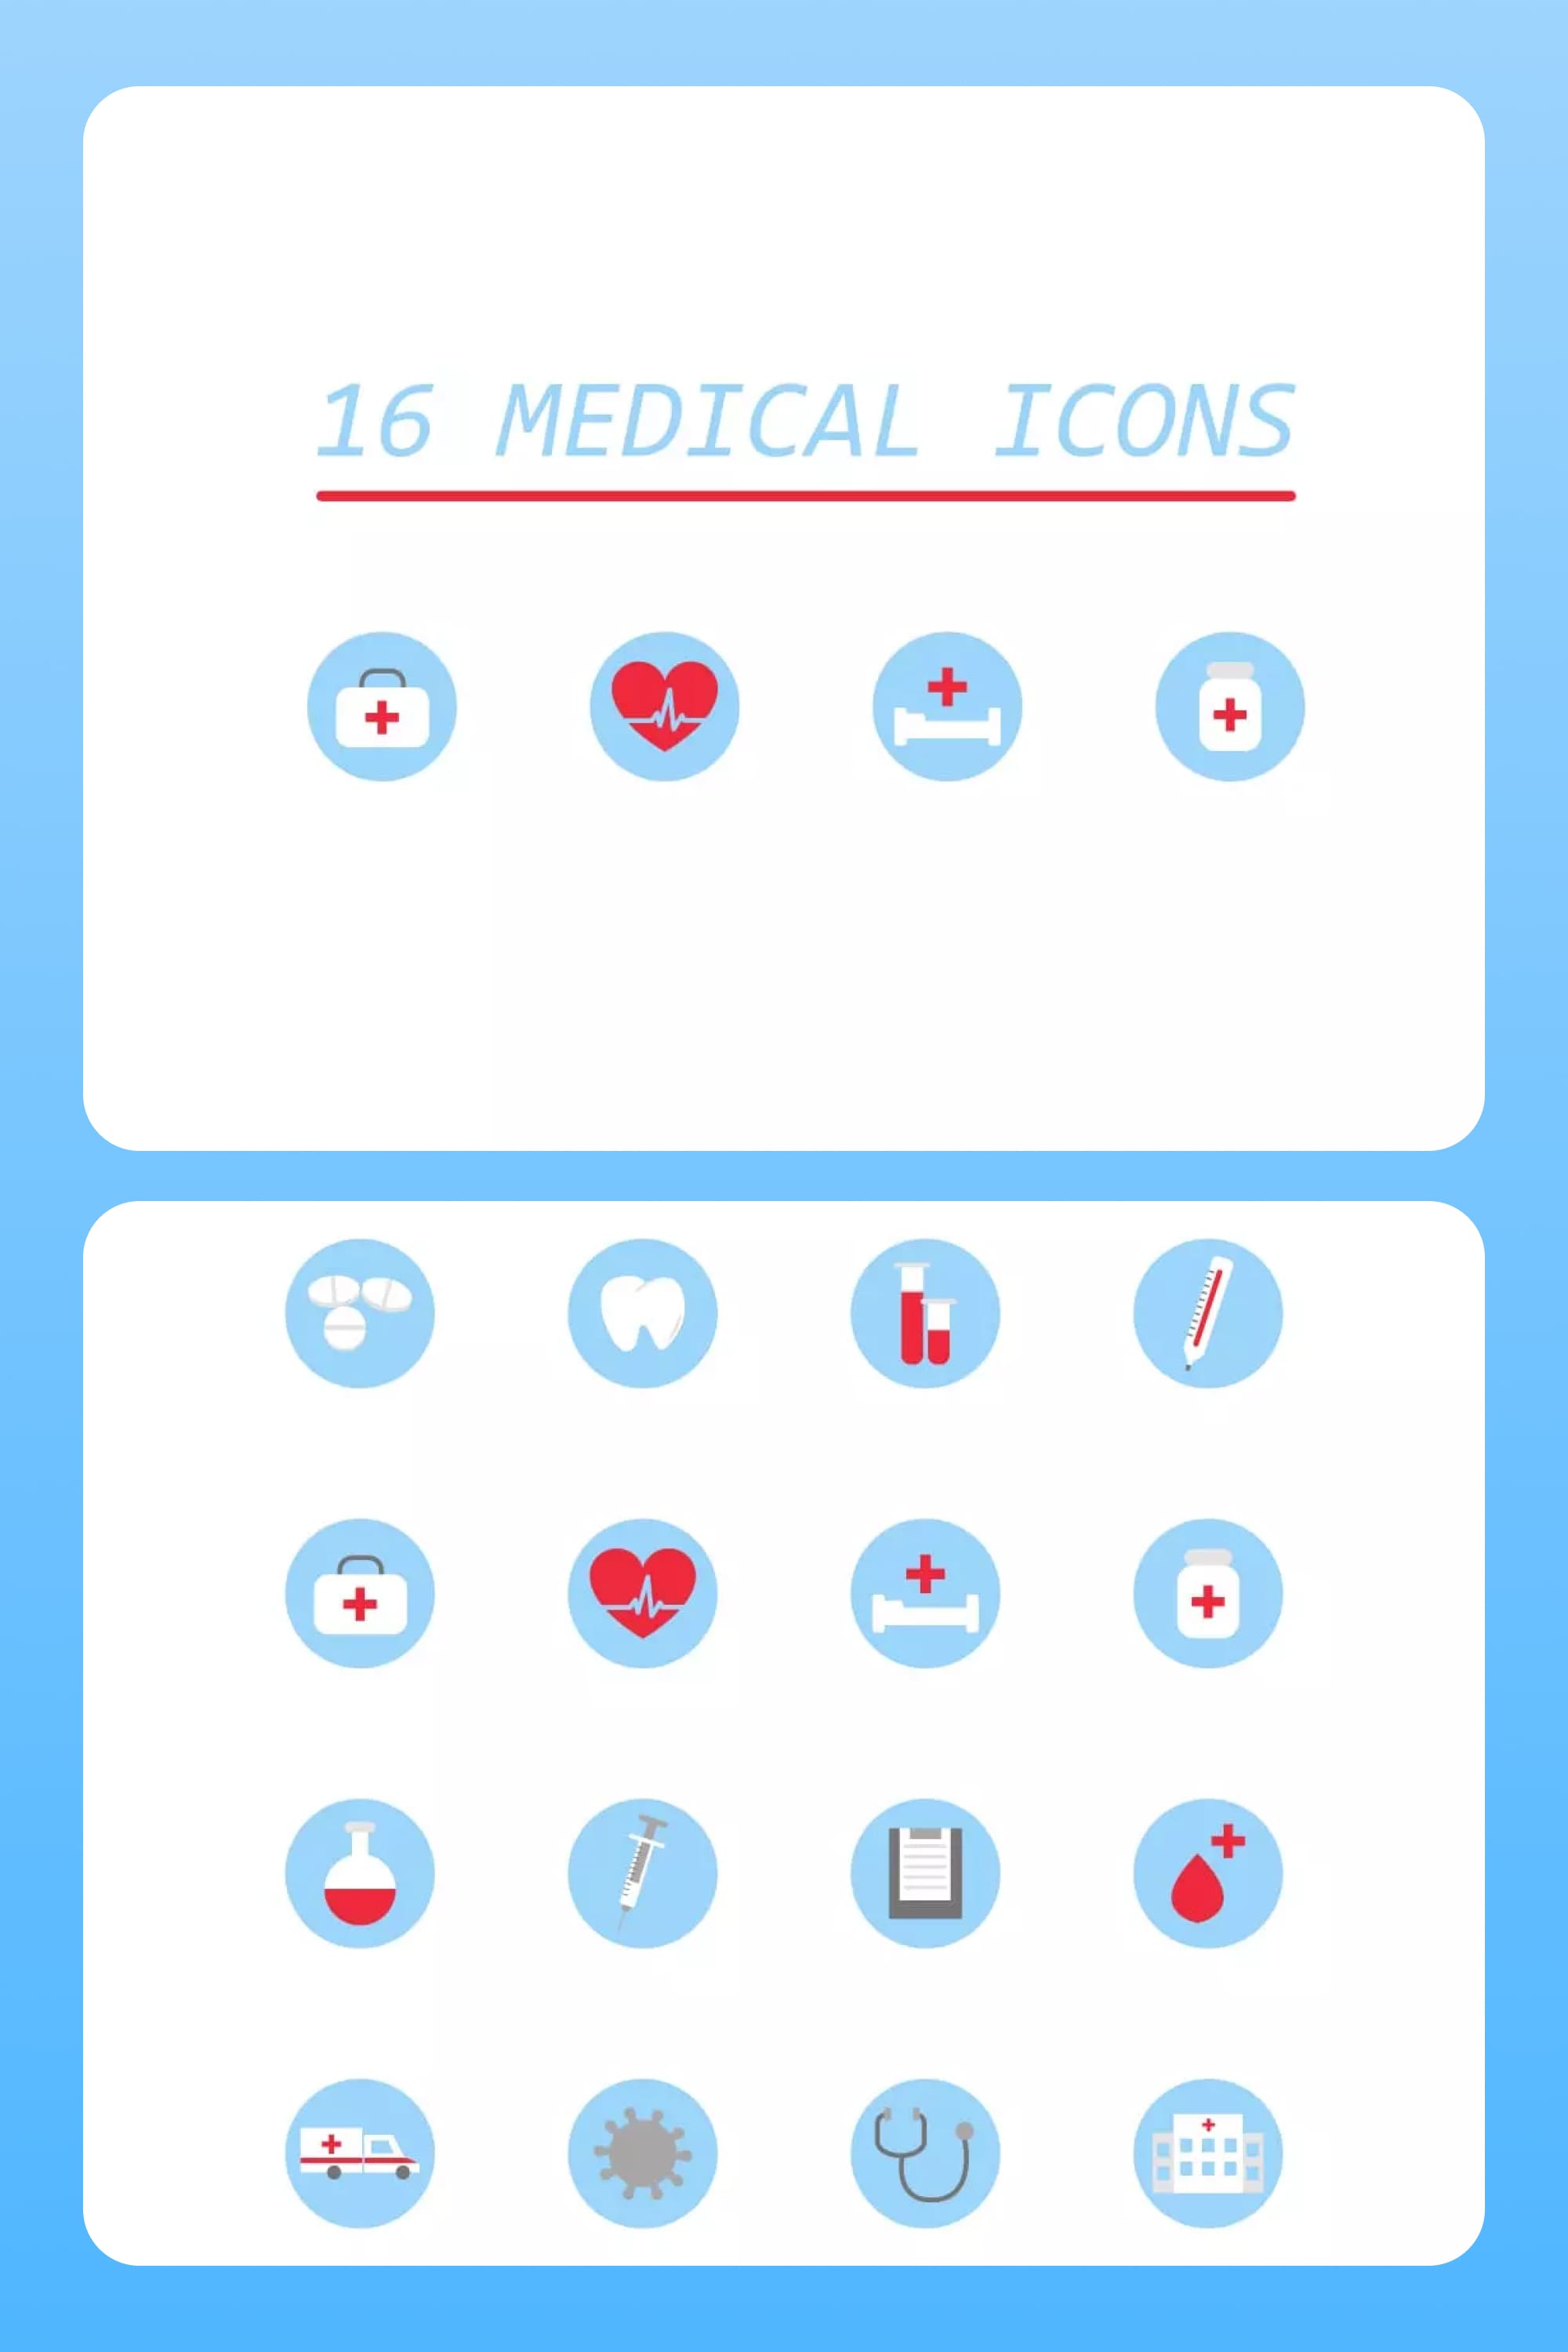 Color icons for medical applications on a white background.